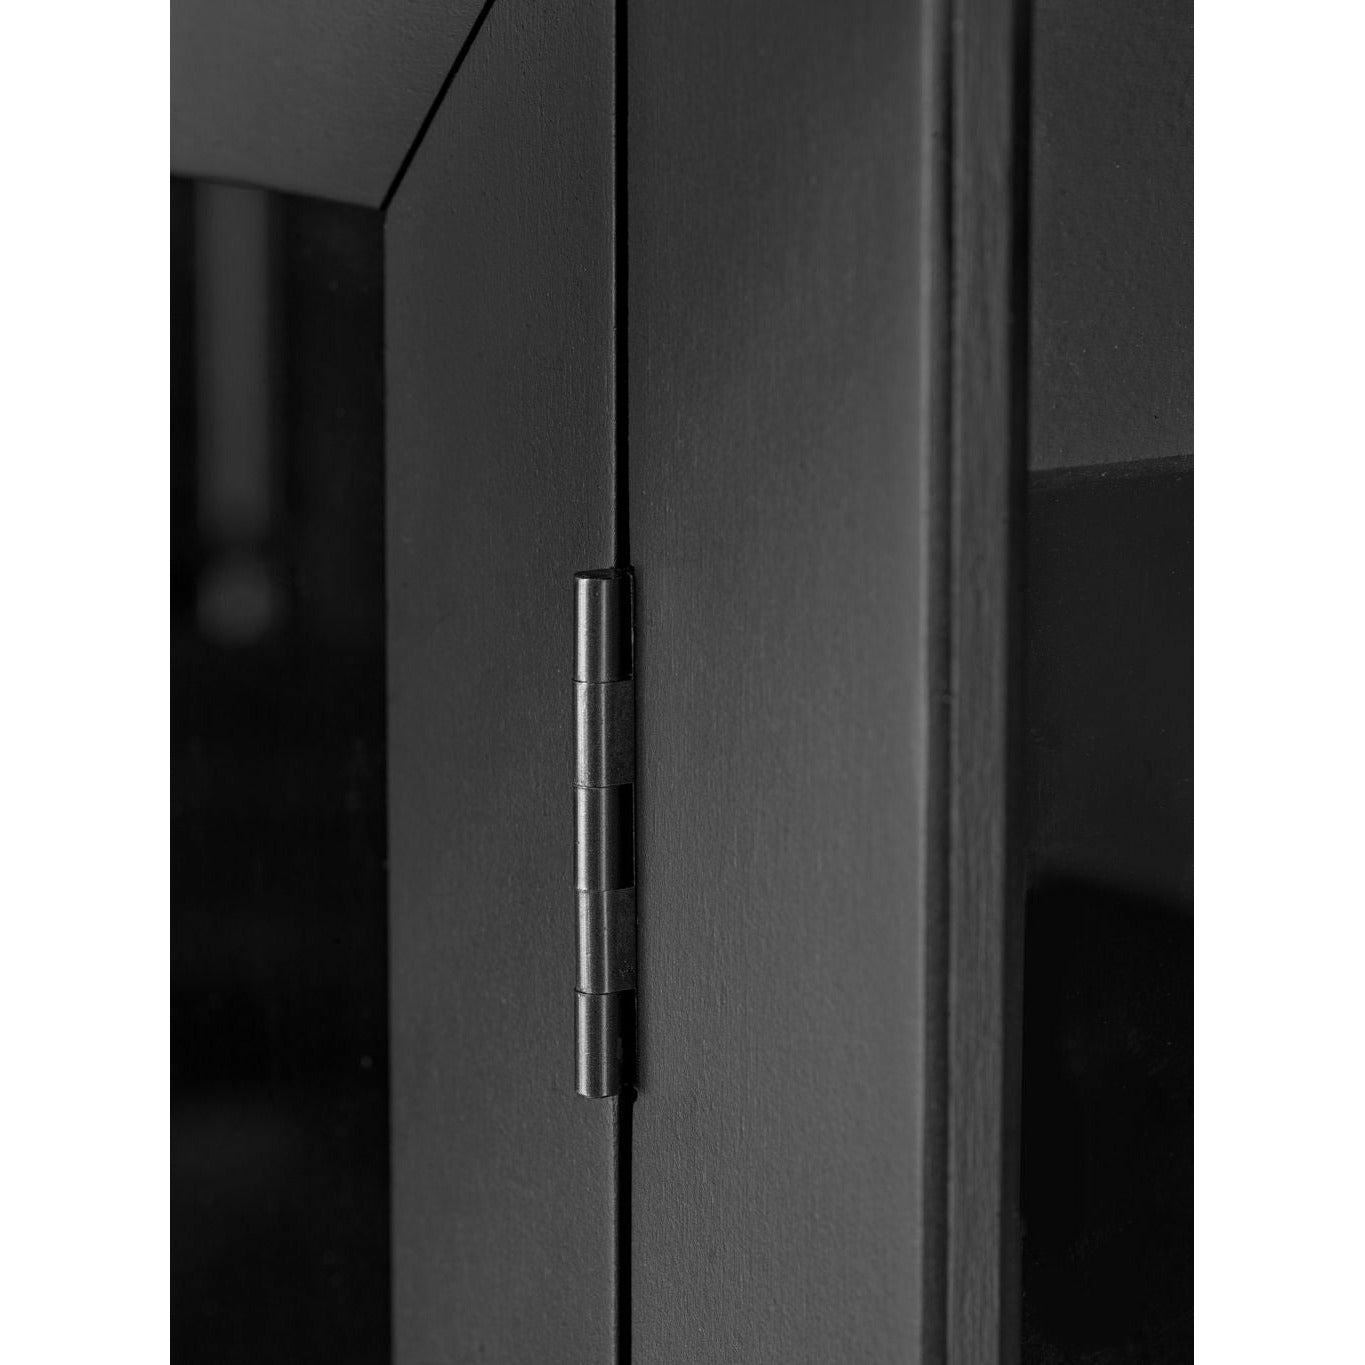 Fdb Møbler A90 Borne Display Cabinet Beech Black Lacquered, H: 127 cm